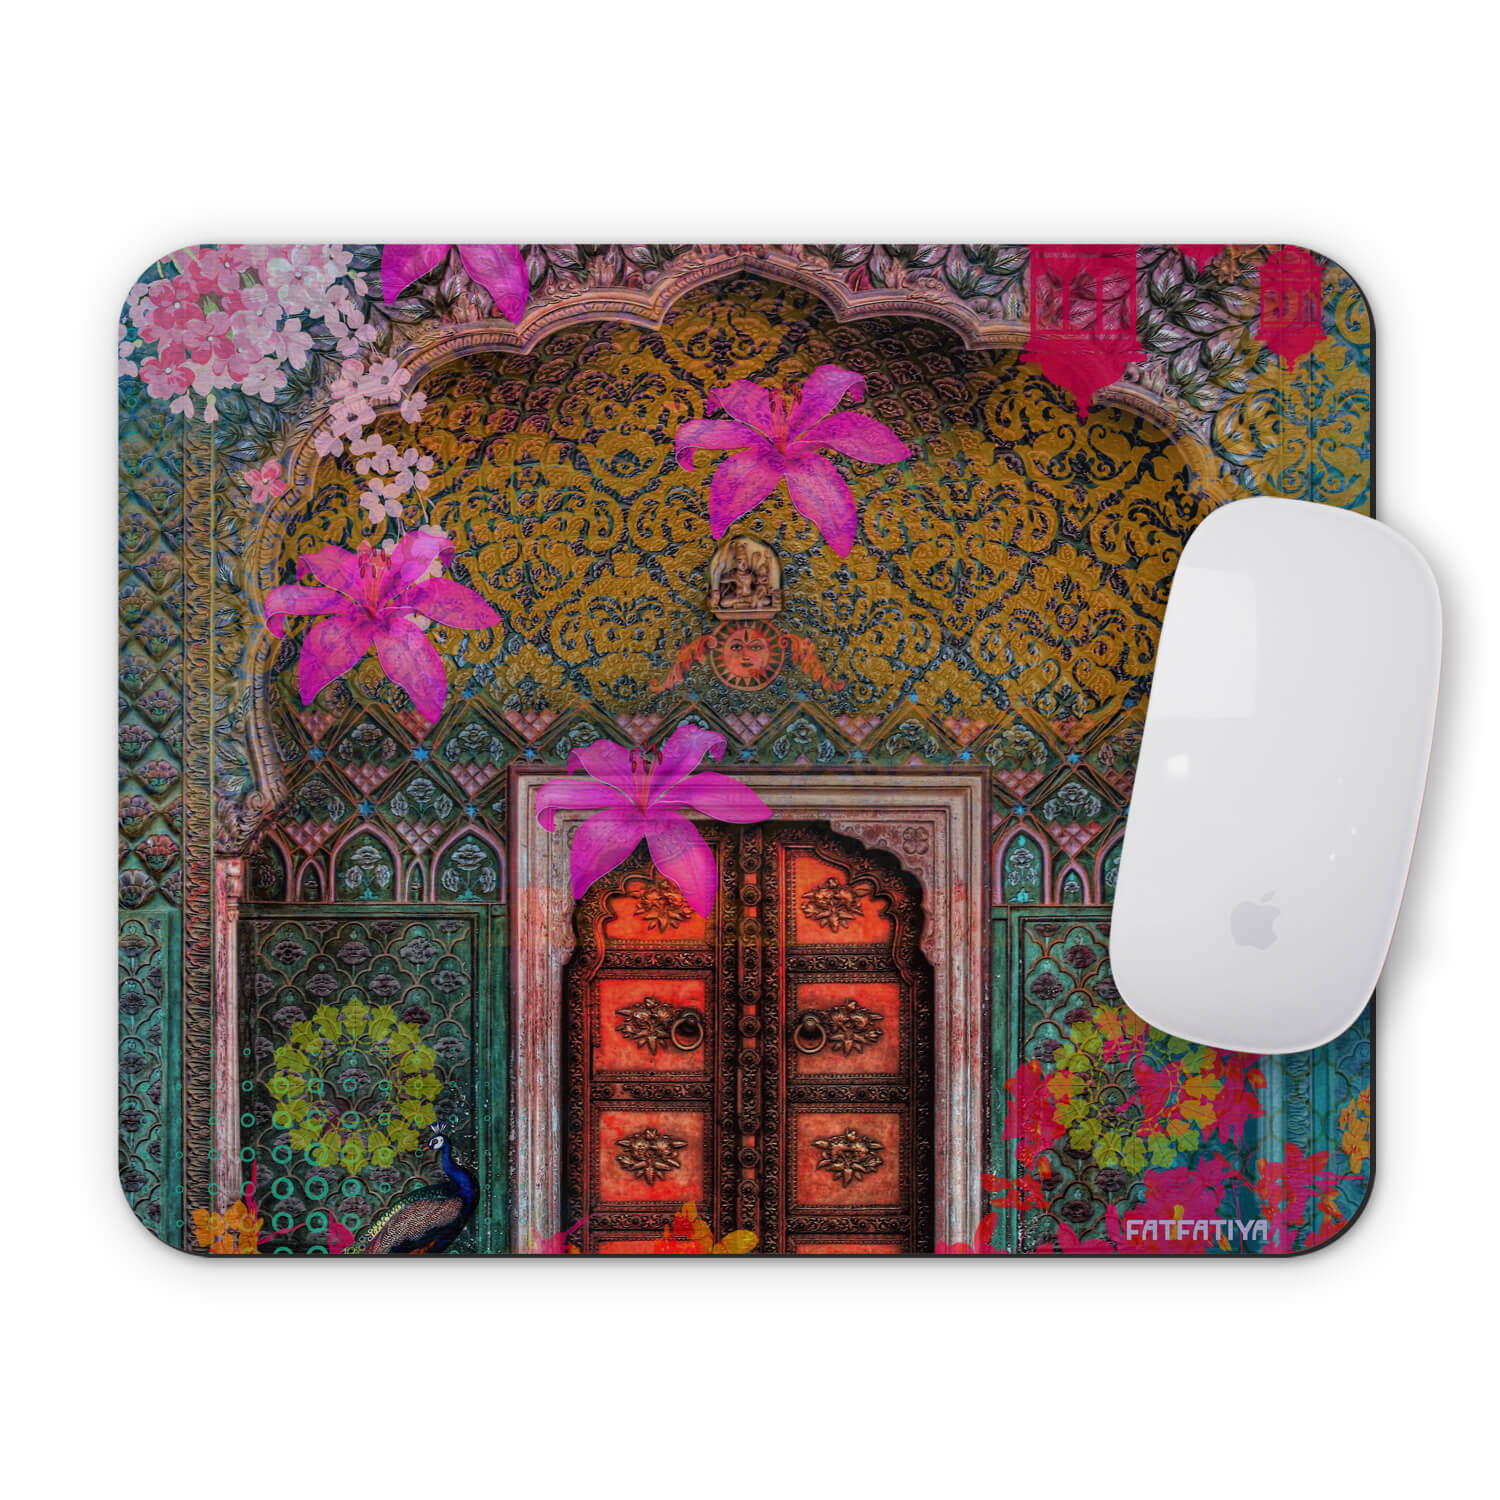 Buy Colourful Mouse Pads Online at Best Price